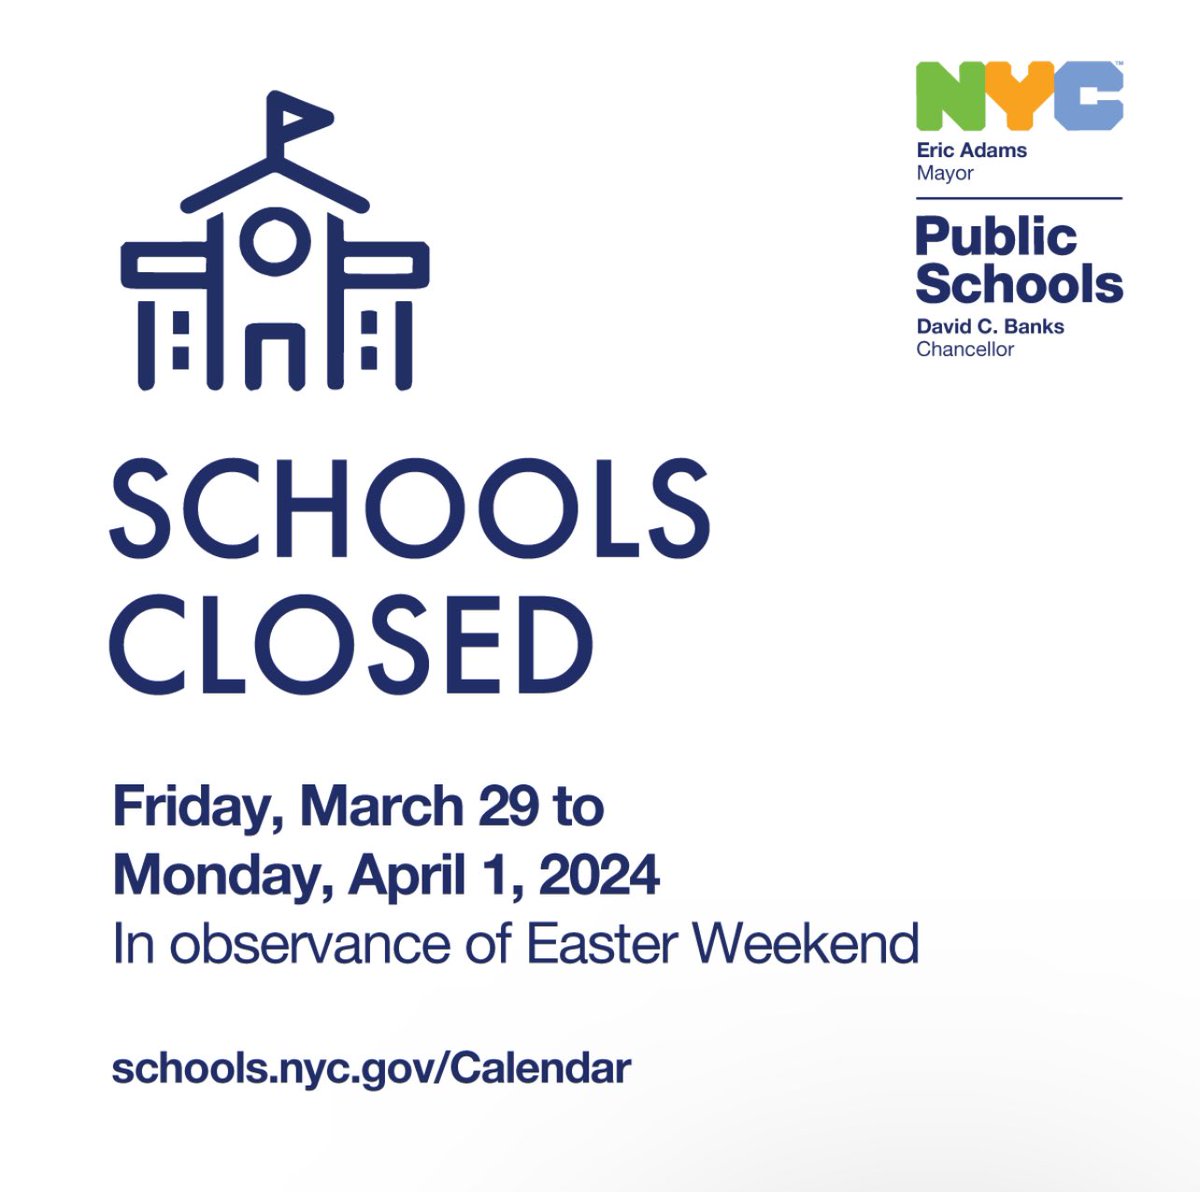 REMINDER: New York City Public Schools will be closed from Friday, March 29 to Monday, April 1, in observance of Easter Weekend. schools.nyc.gov/calendar